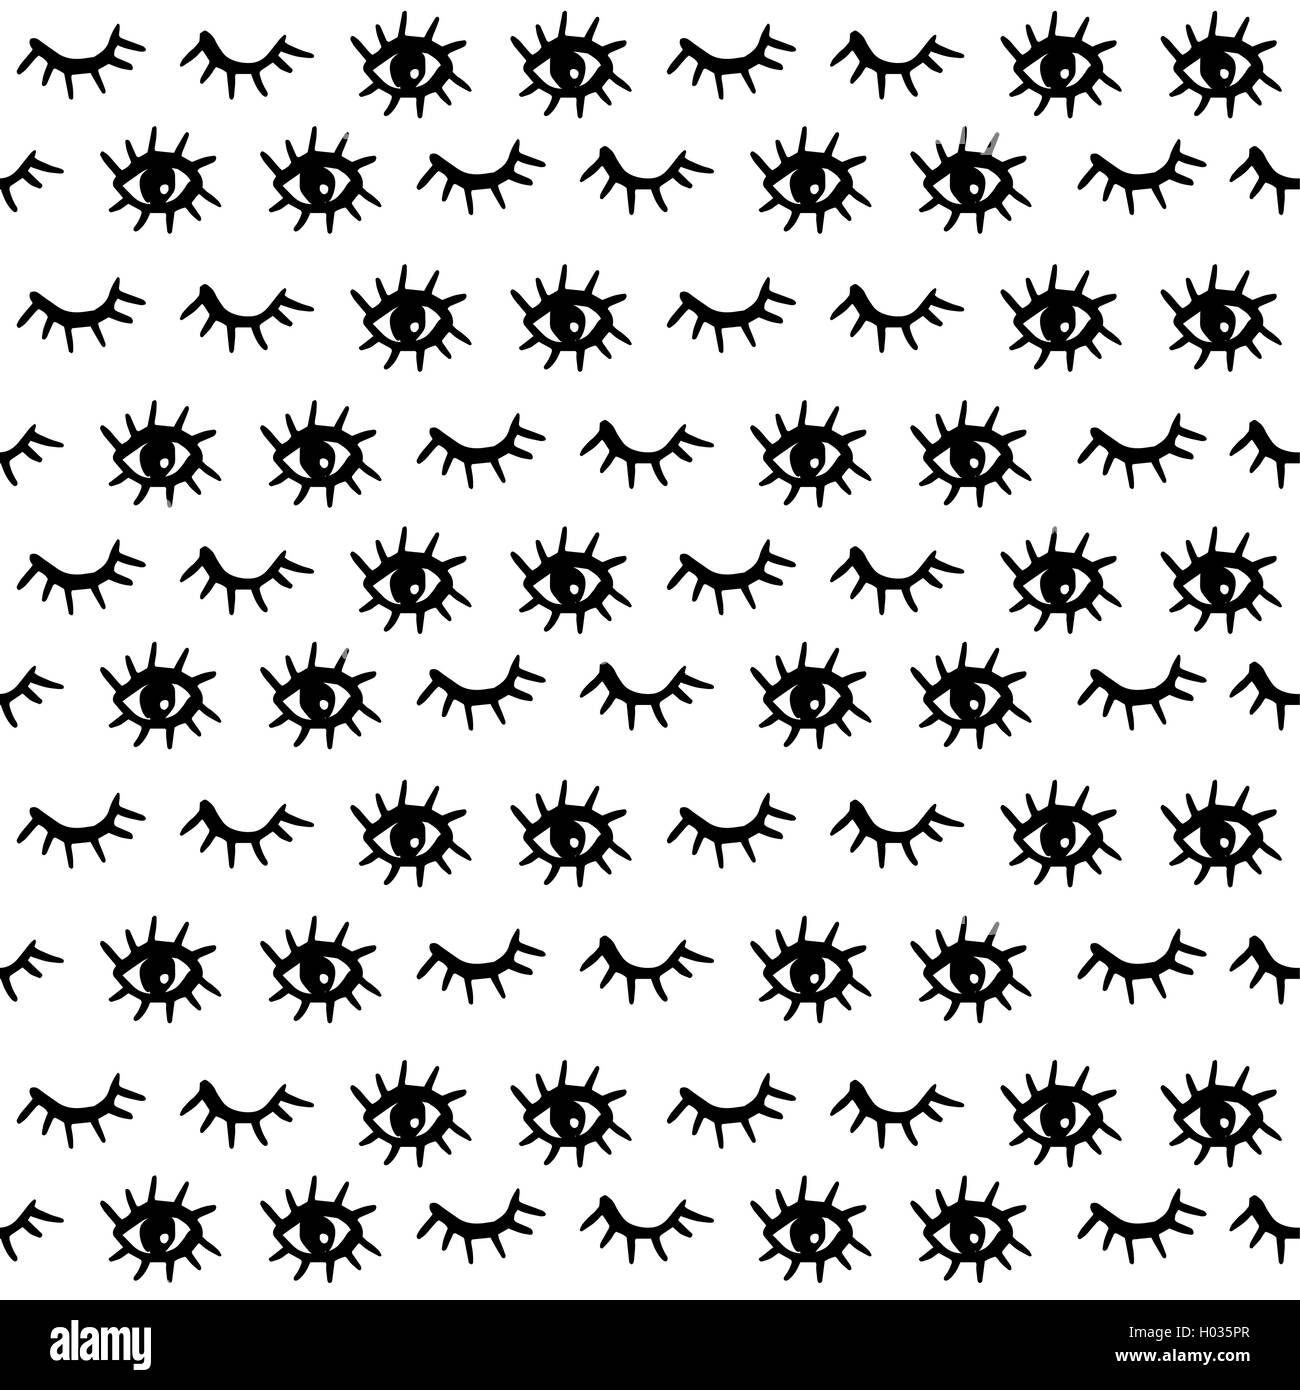 Hand drawn art seamless pattern, human eye illustration background in black and white. EPS10 vector. Stock Vector